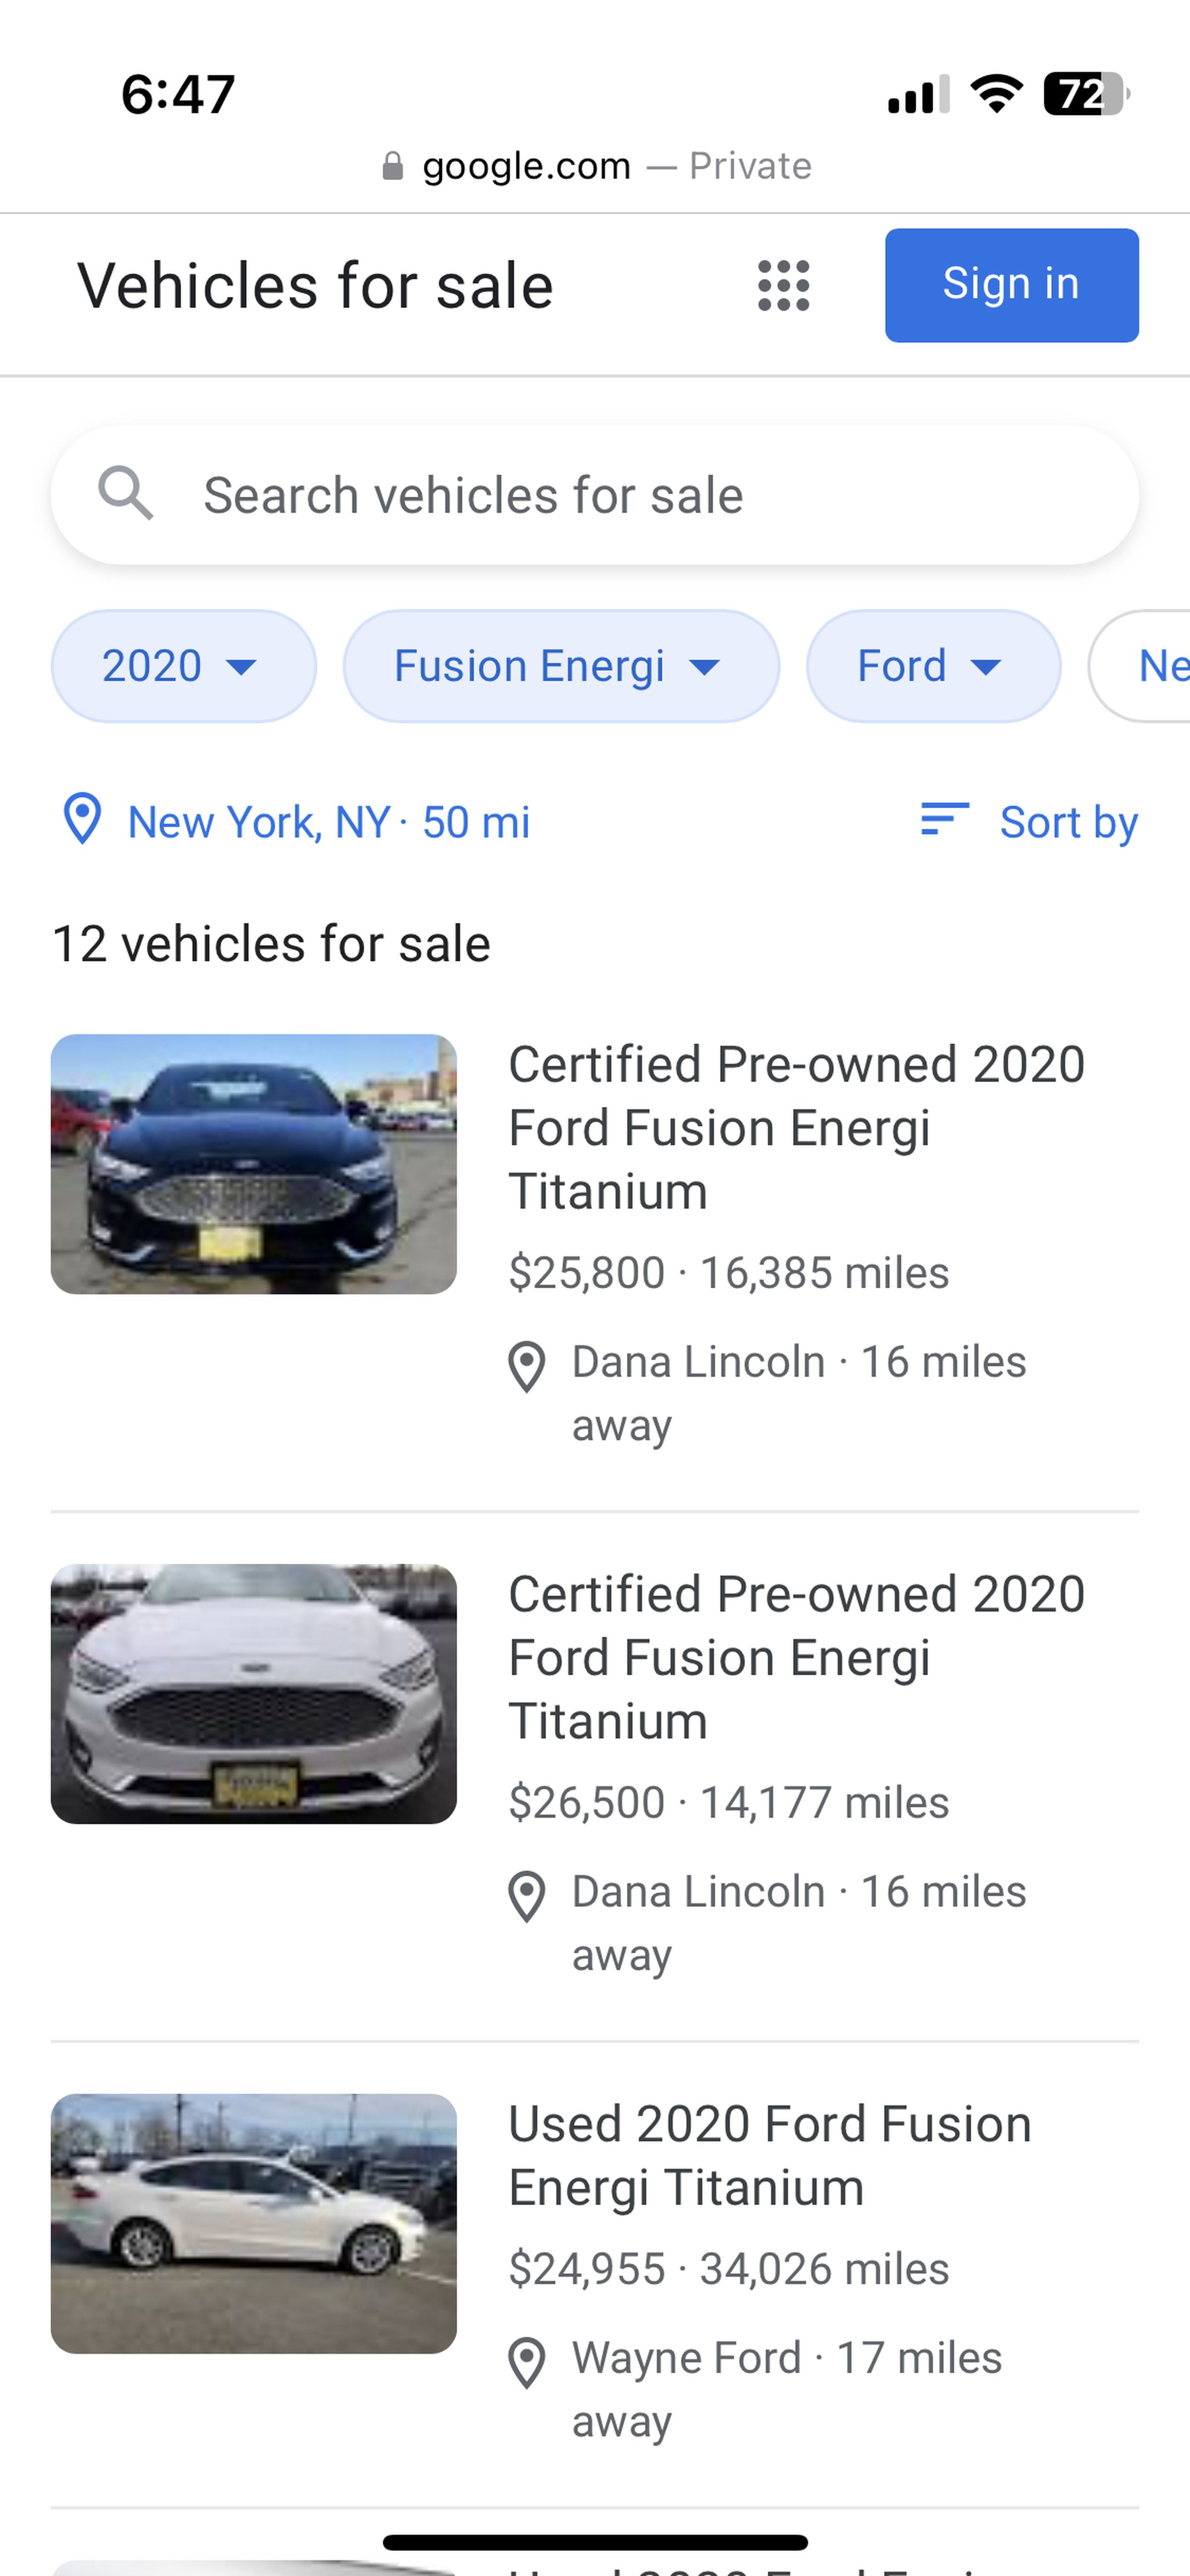 Google’s Vehicles for sale listings looks like any car buying app out there.